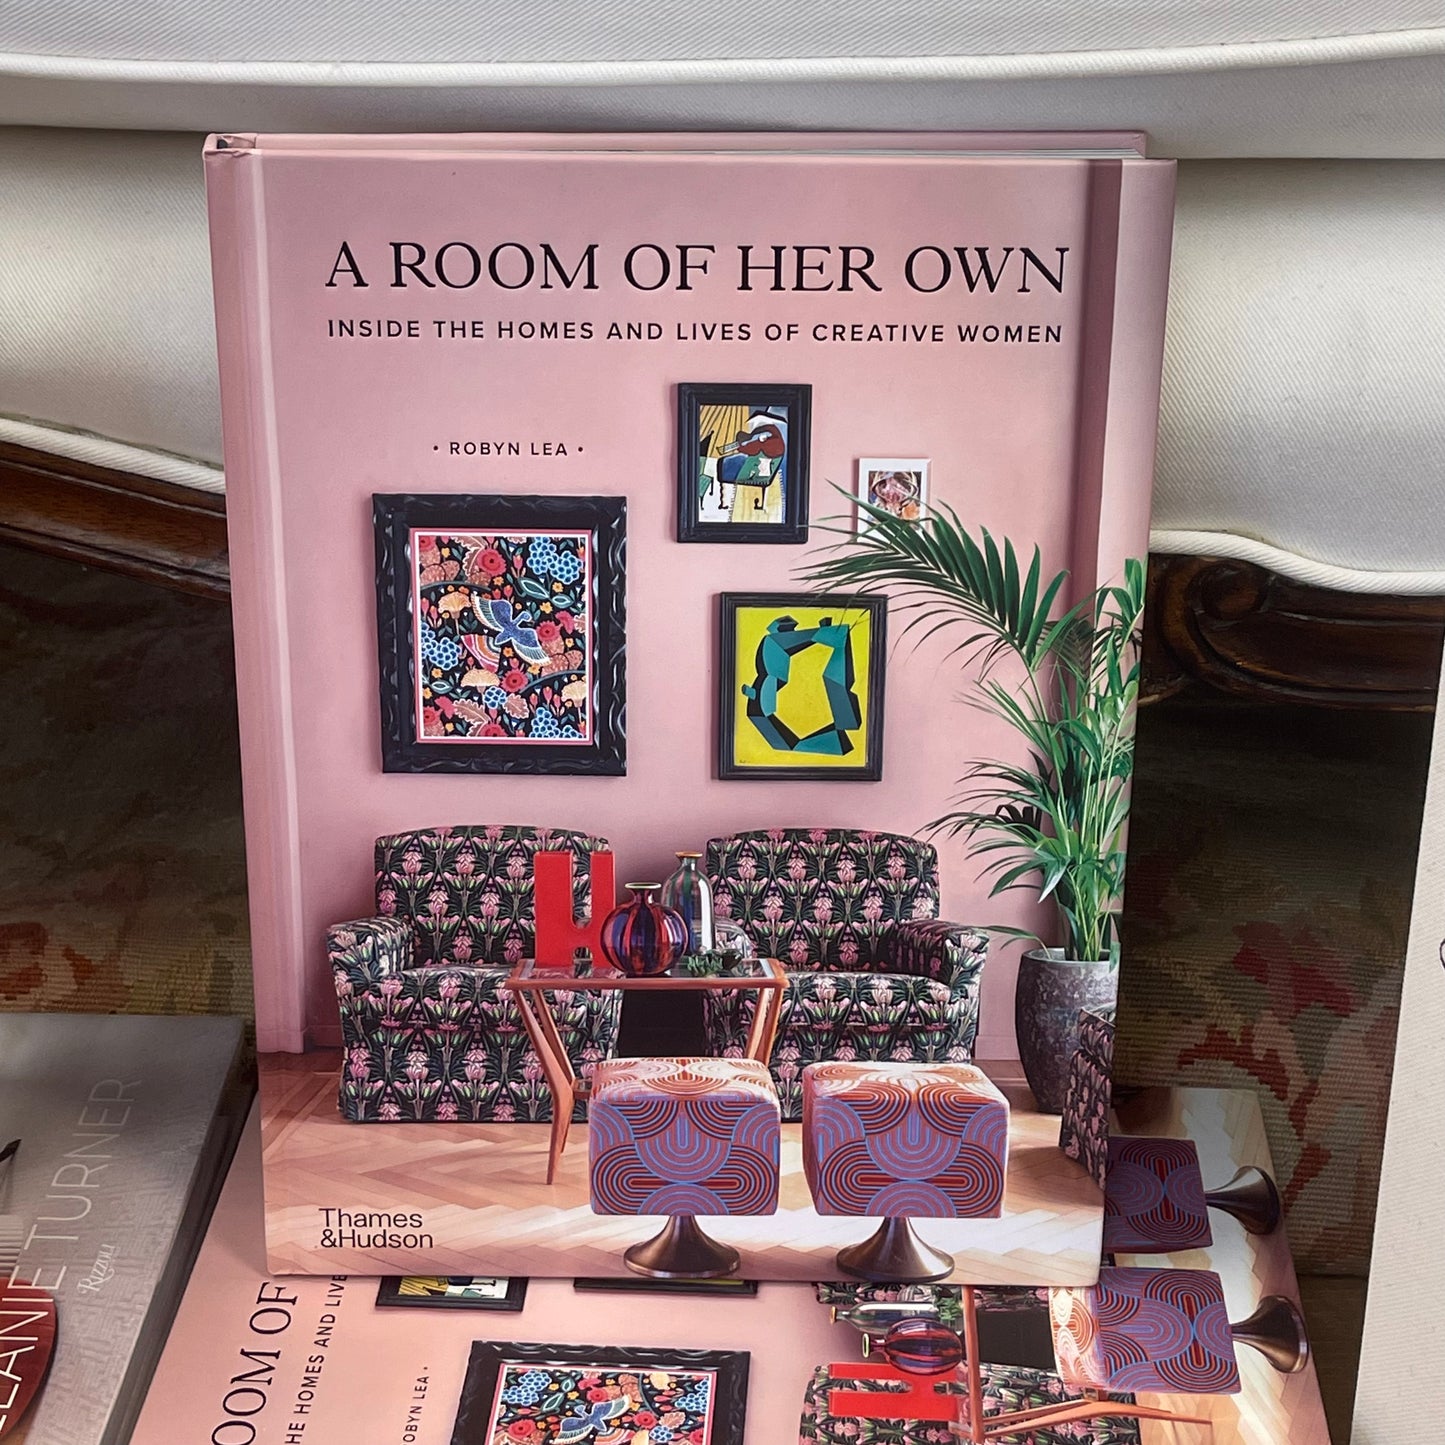 A Room of Her Own: Inside the Homes of Creative Women by Robyn Lea